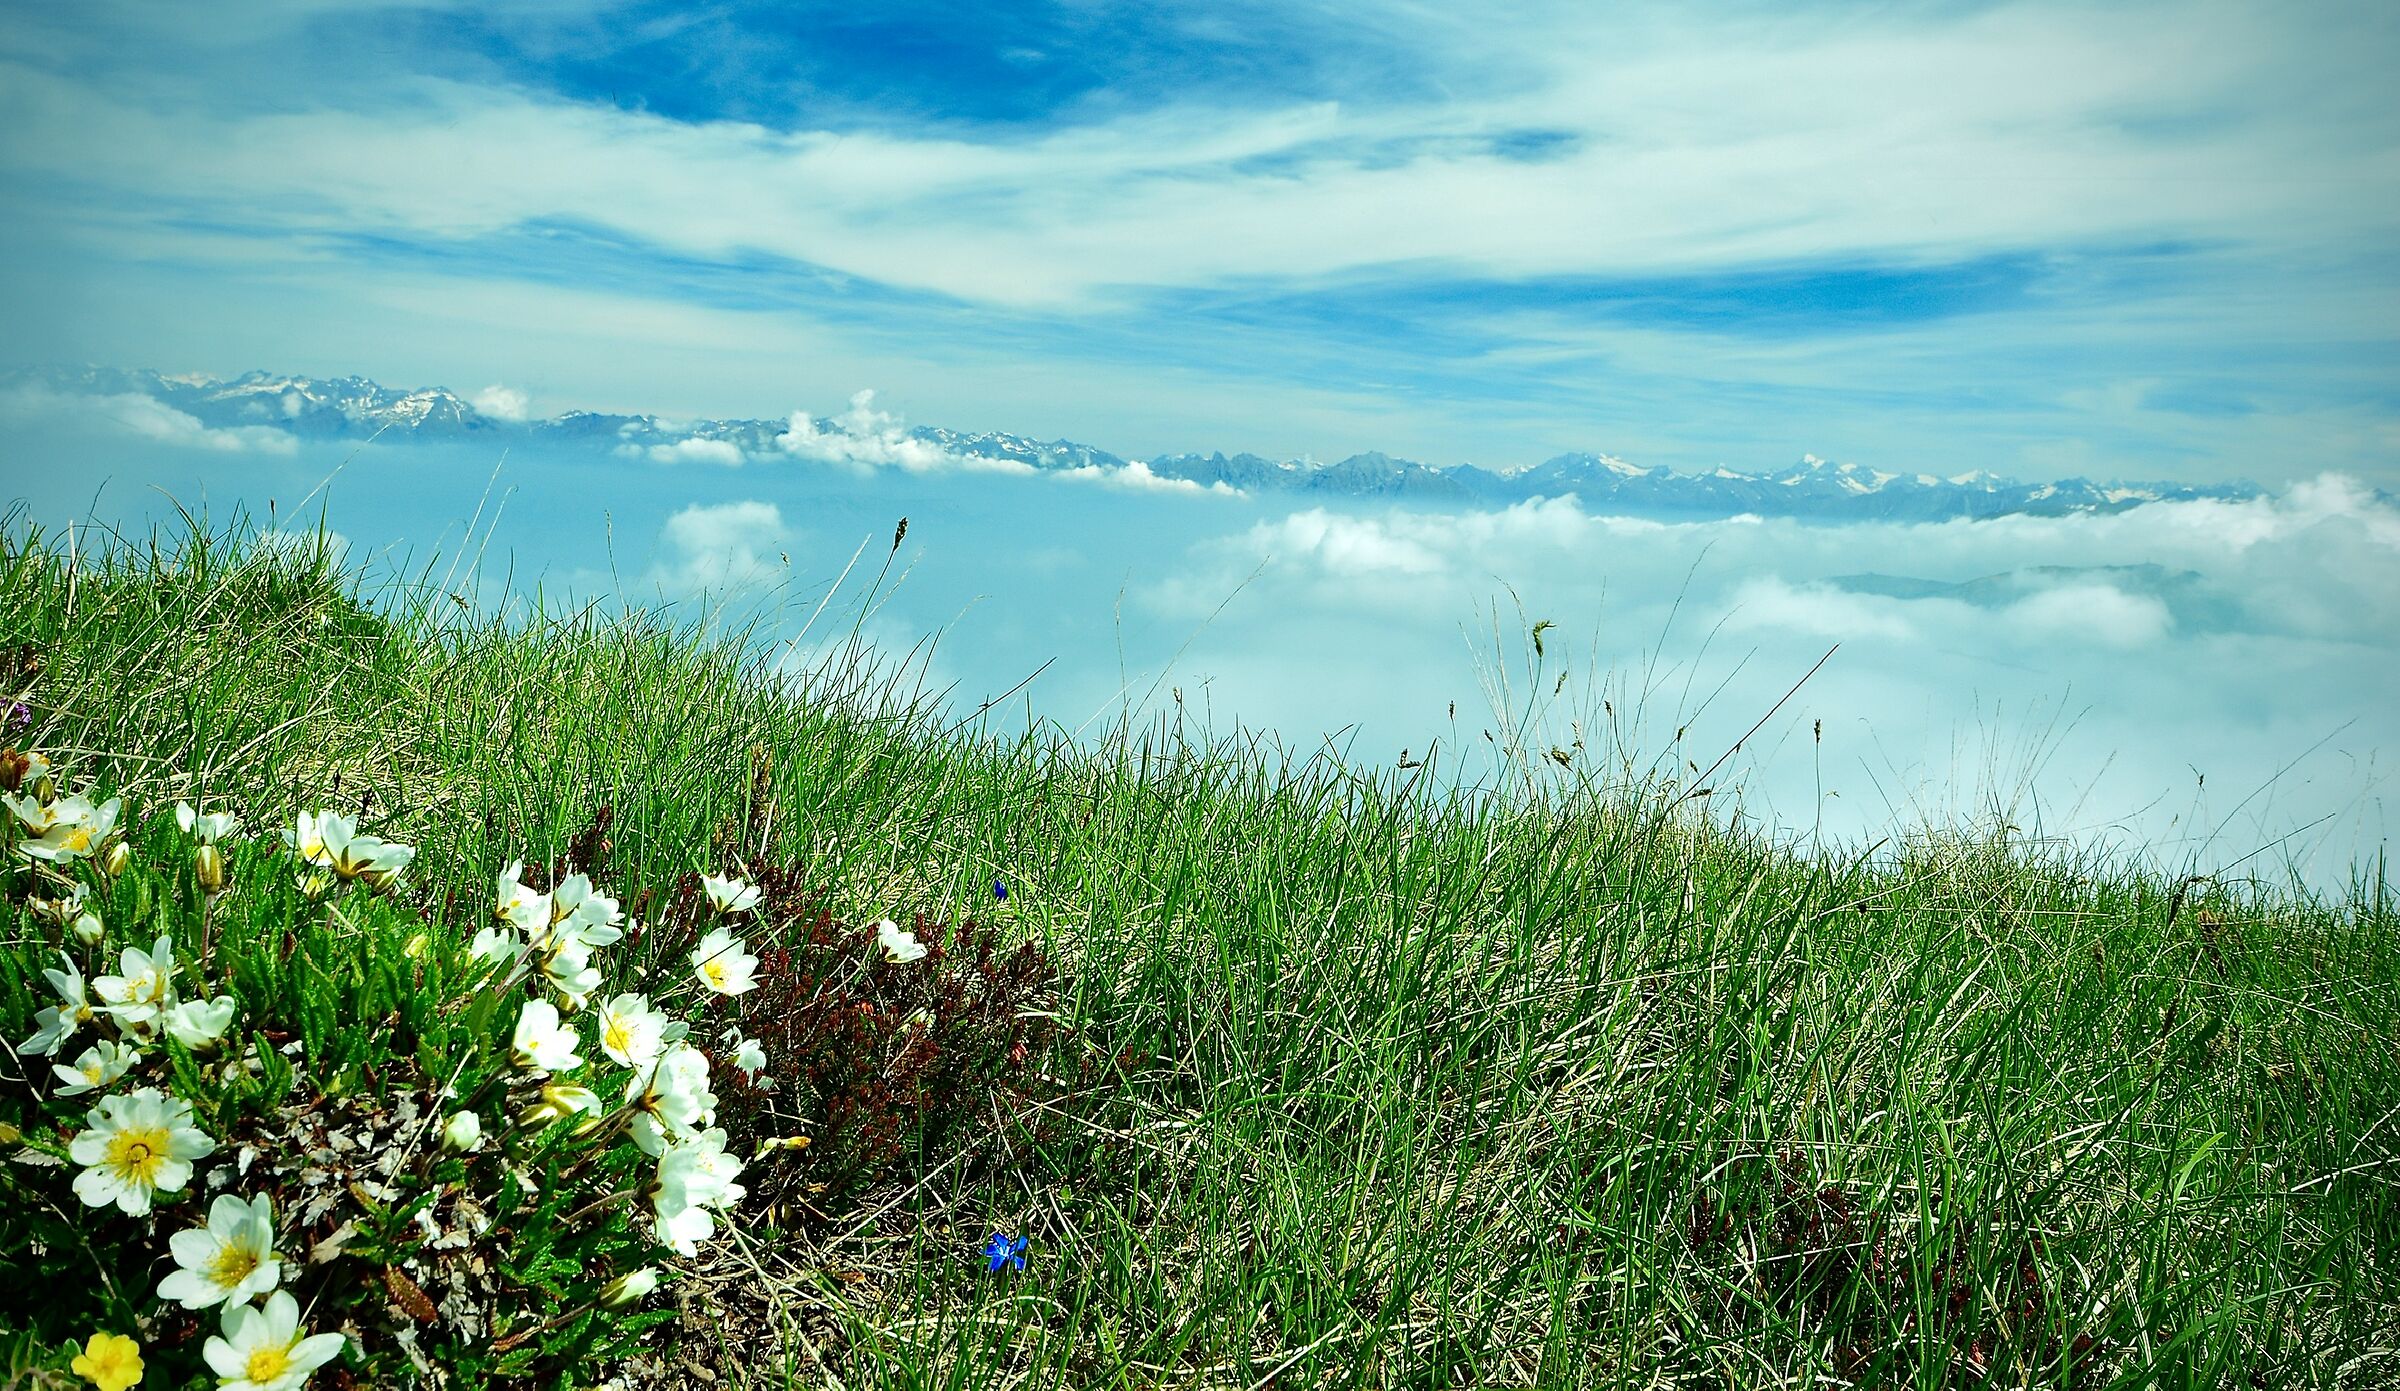 Flowers, grass, clouds and pre-alpines...